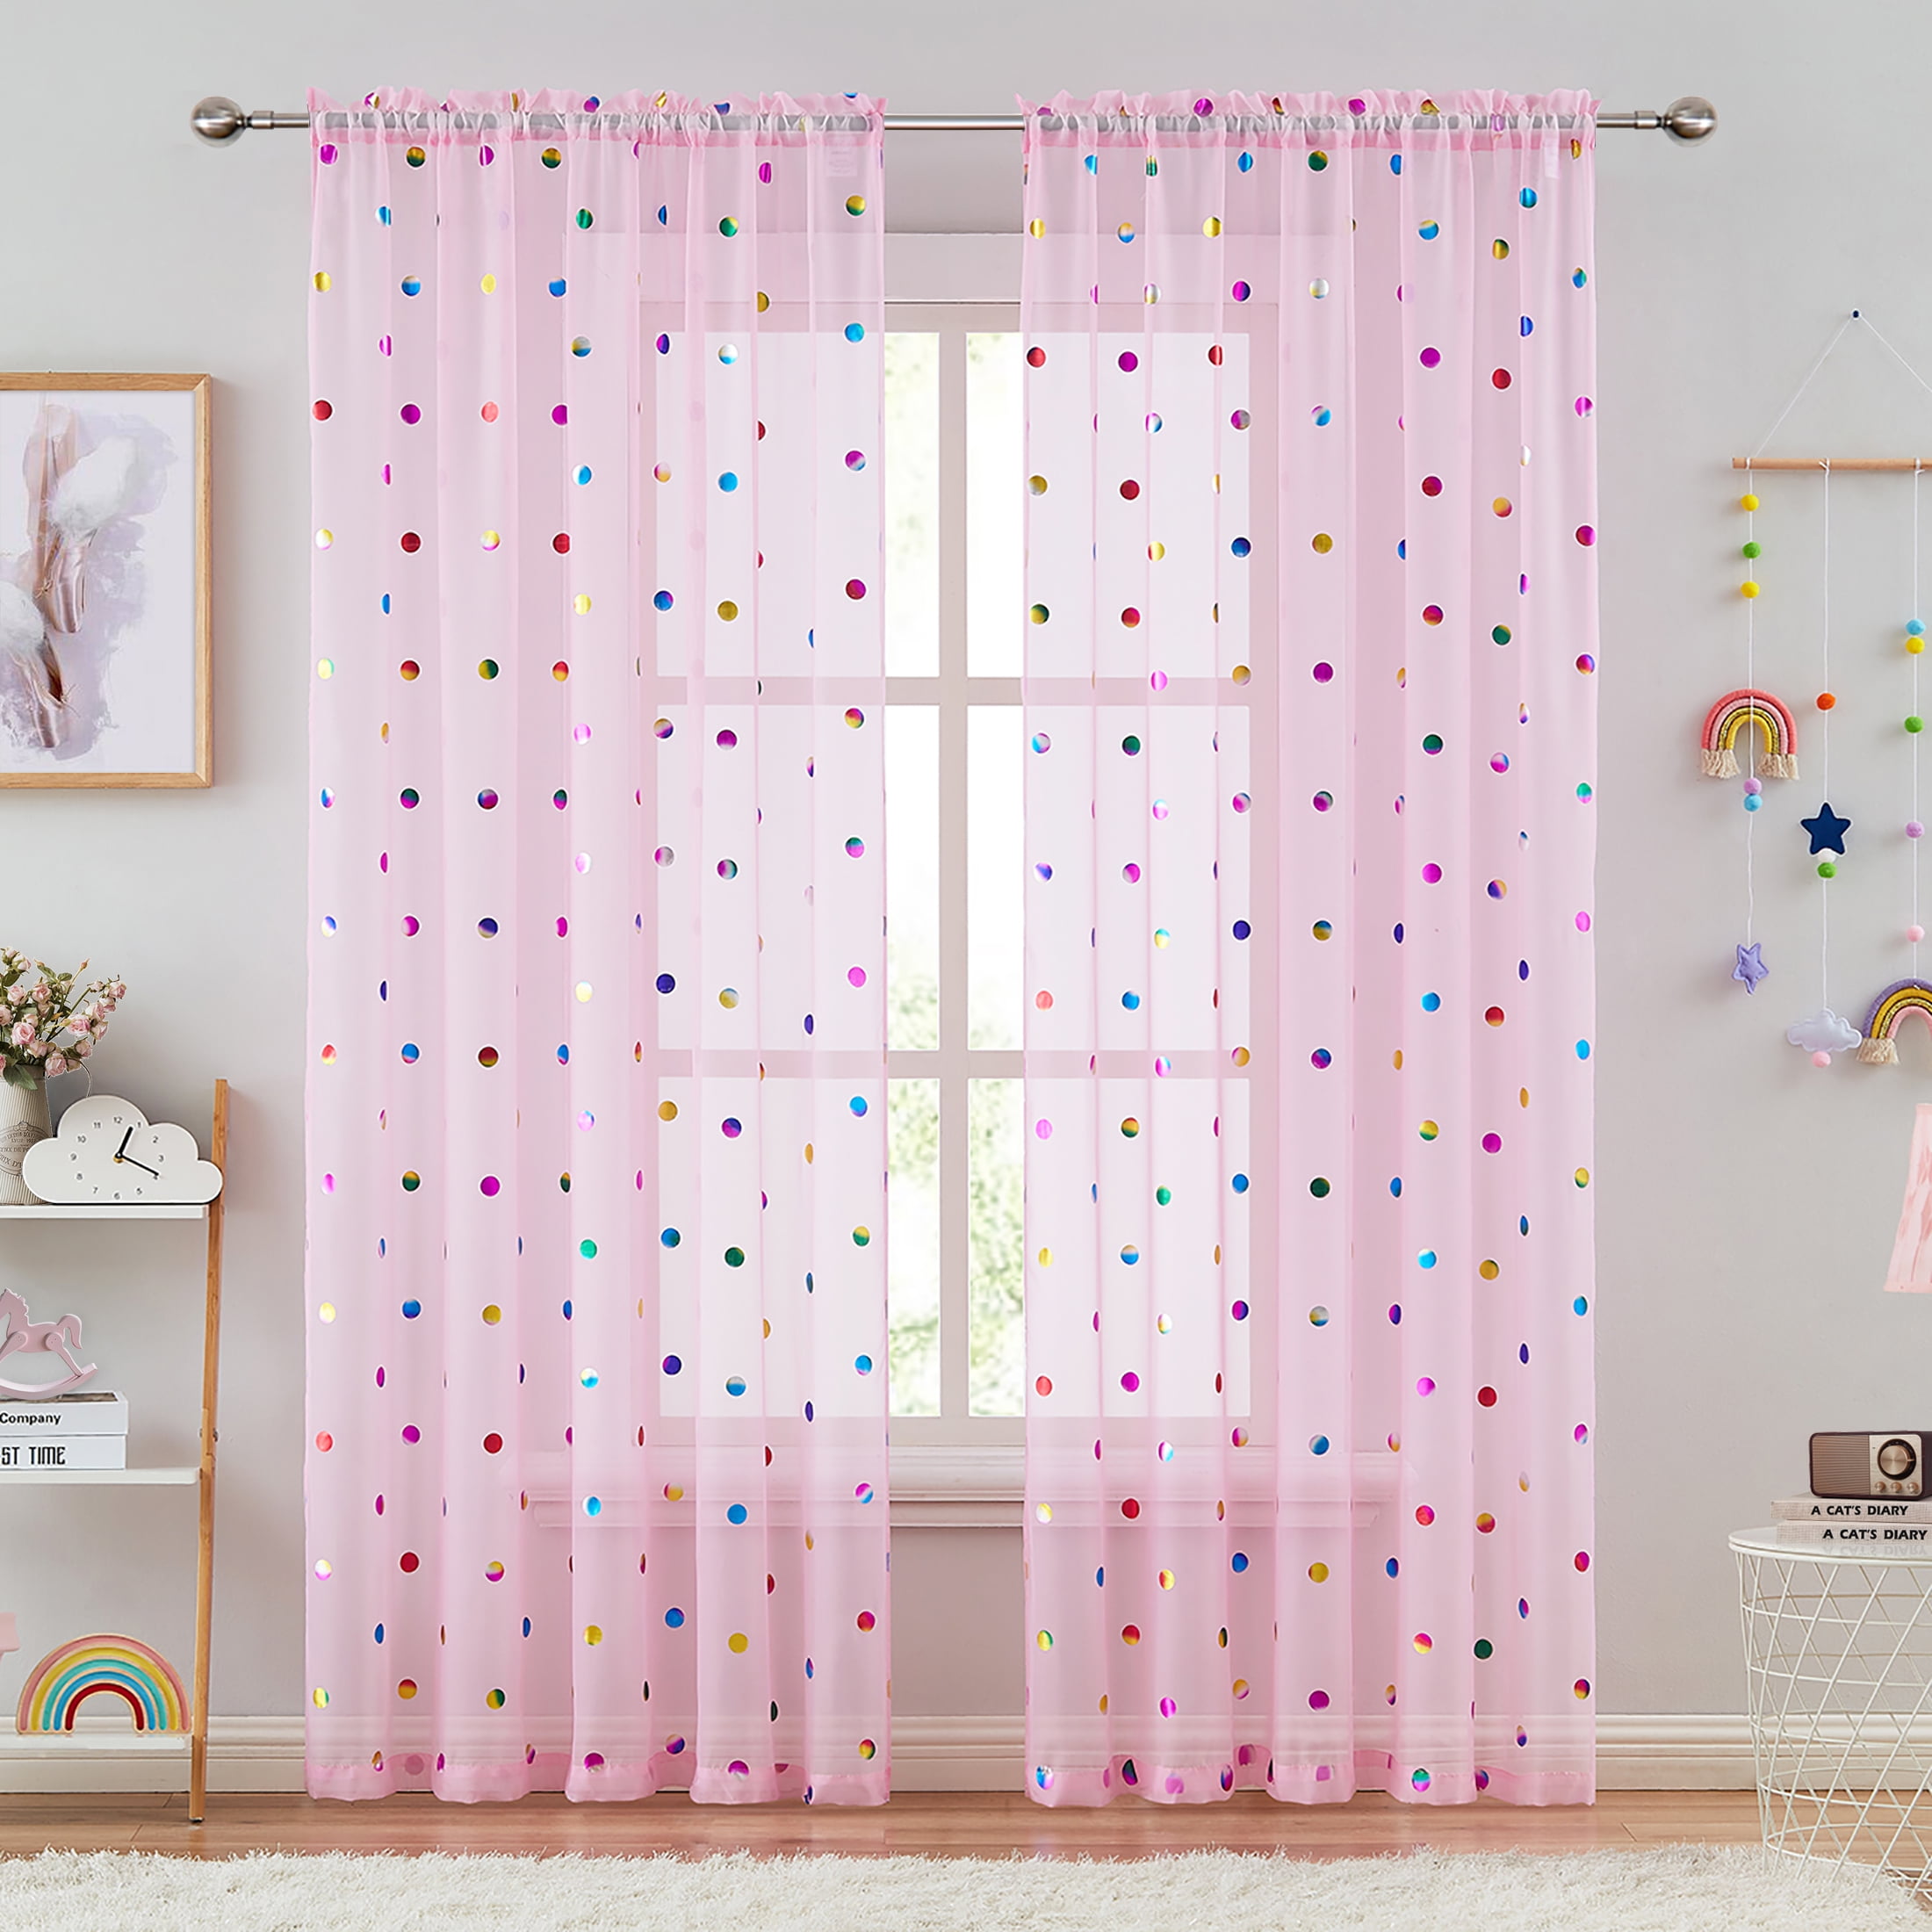 Bazaahm Sheer Pink Curtains For Kids Juvenile Girls Room 54 L X 52 W Boho Colorful Metallic Polka Dots Printed Linen Texture Rod Pocket Window Ds Set Of 2 Com